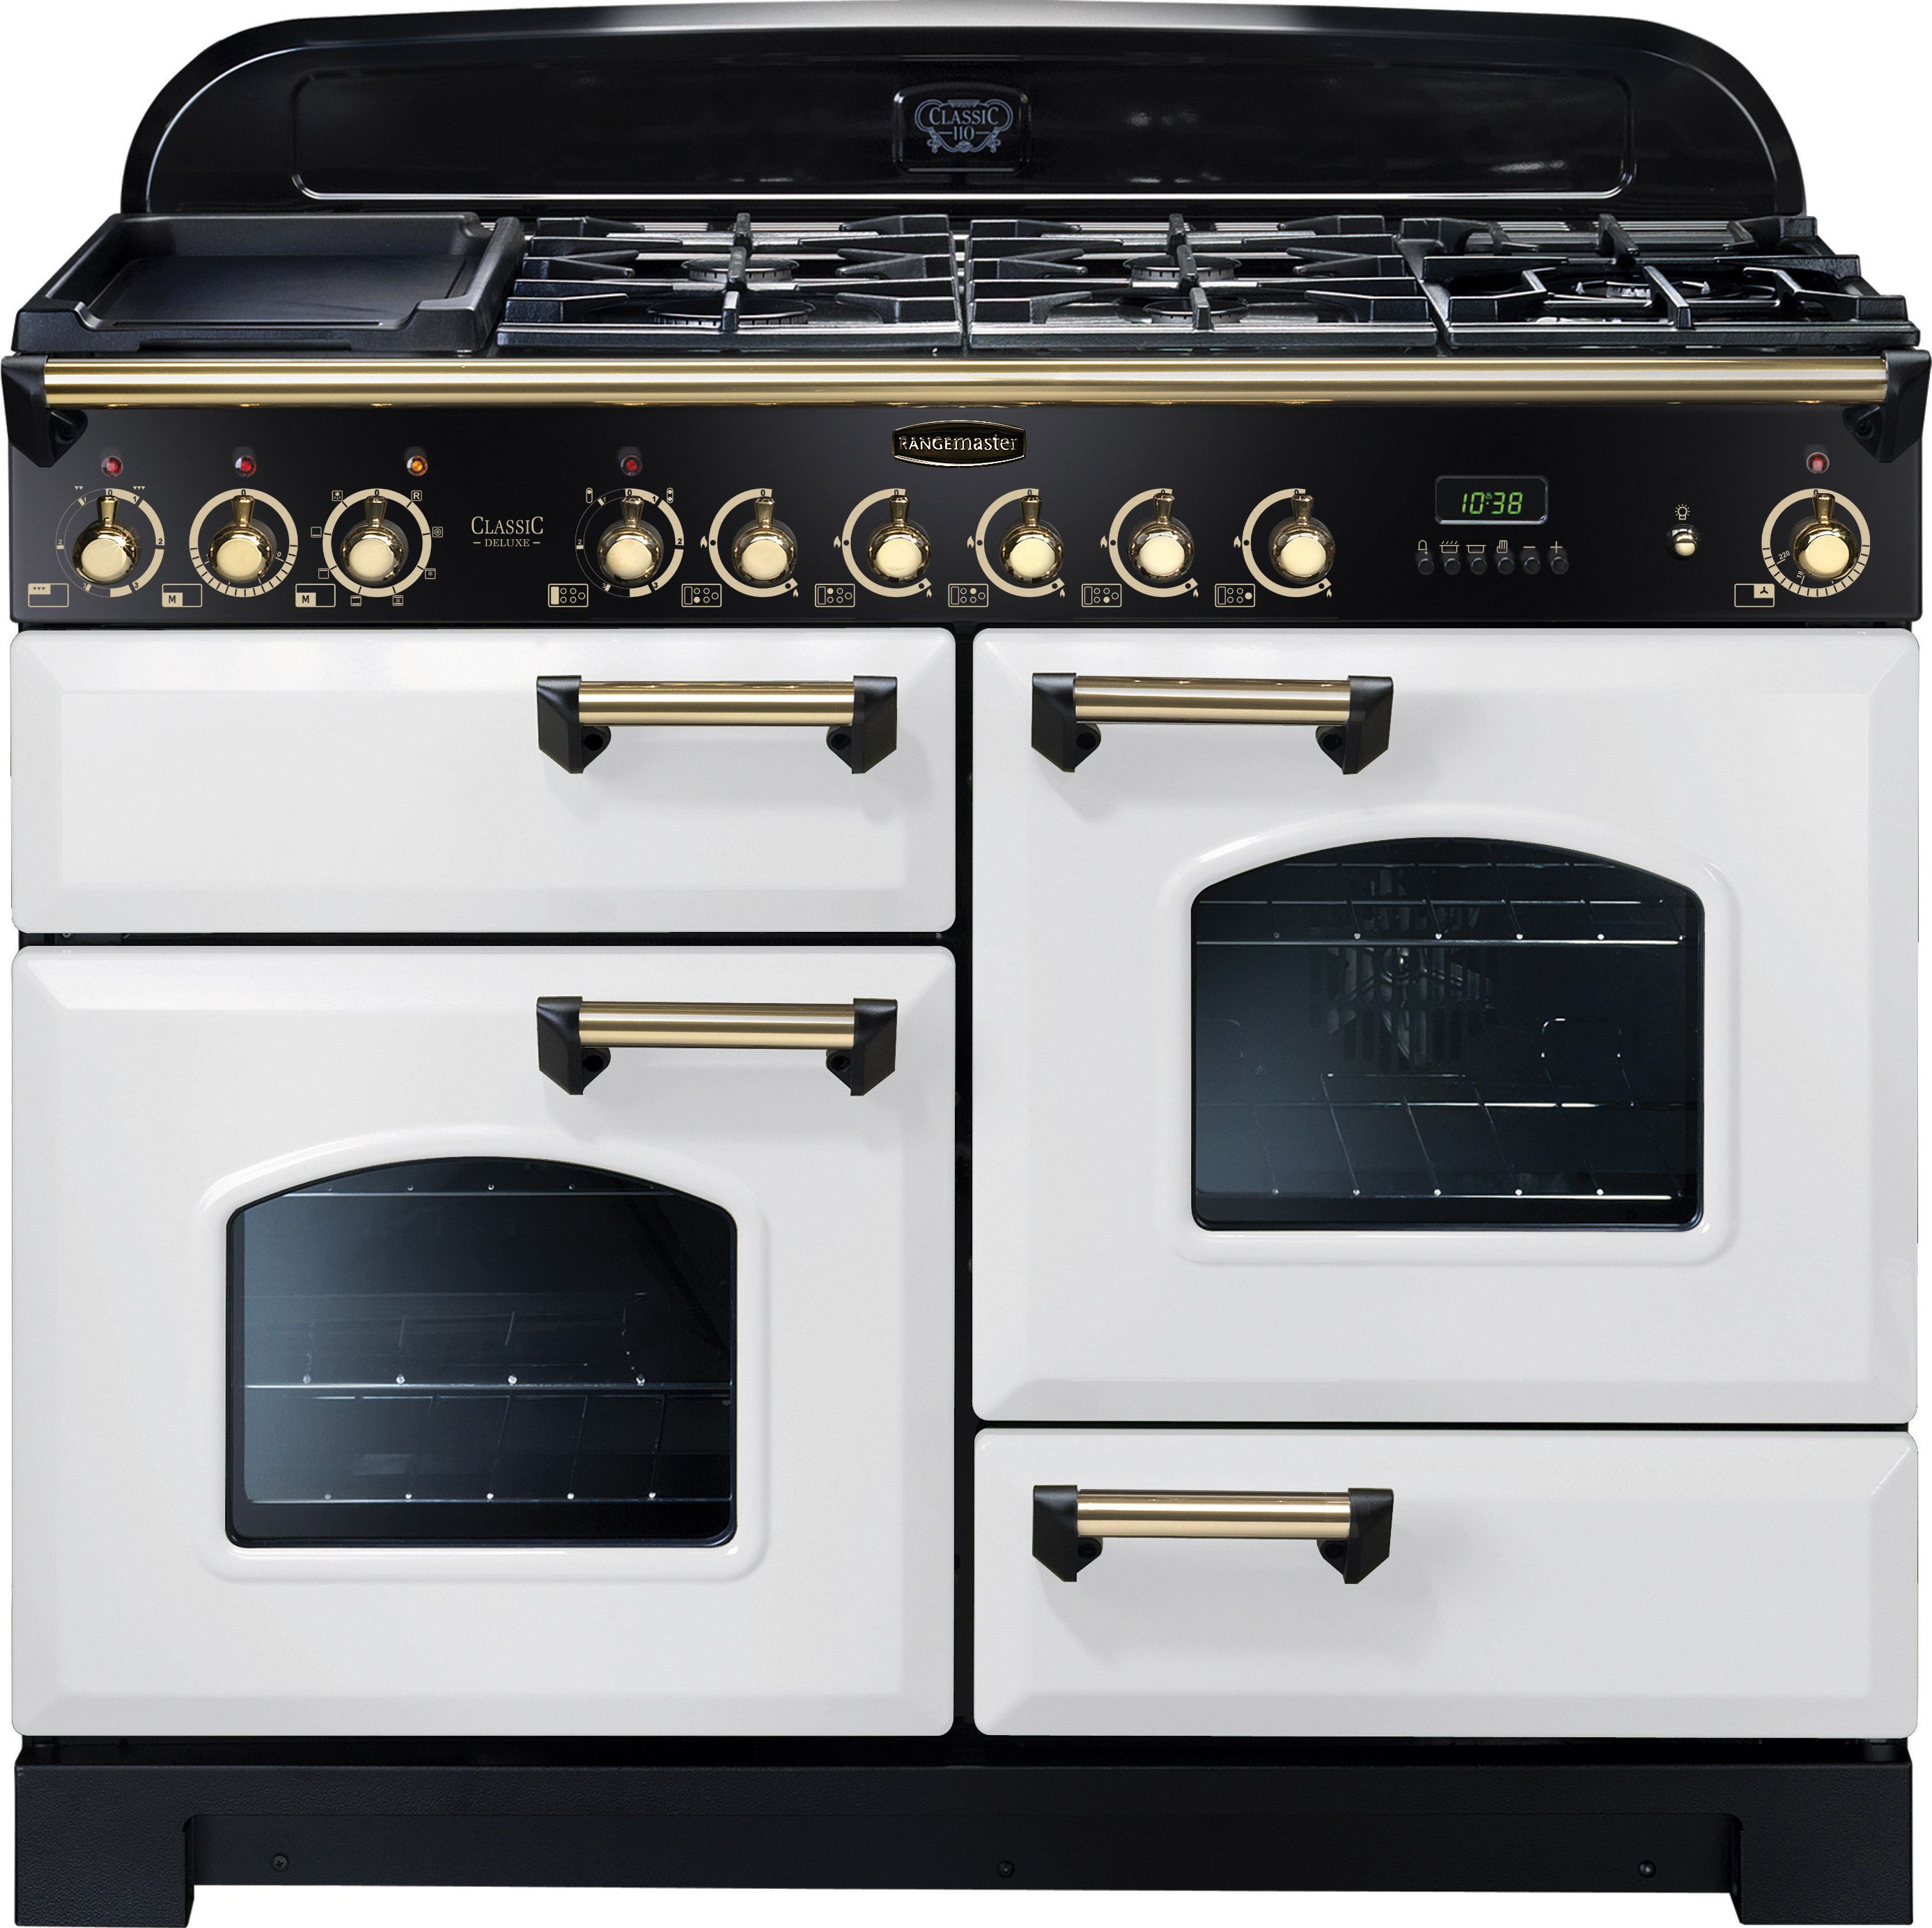 Rangemaster Classic Deluxe CDL110DFFWH/B 110cm Dual Fuel Range Cooker - White / Brass - A/A Rated, White